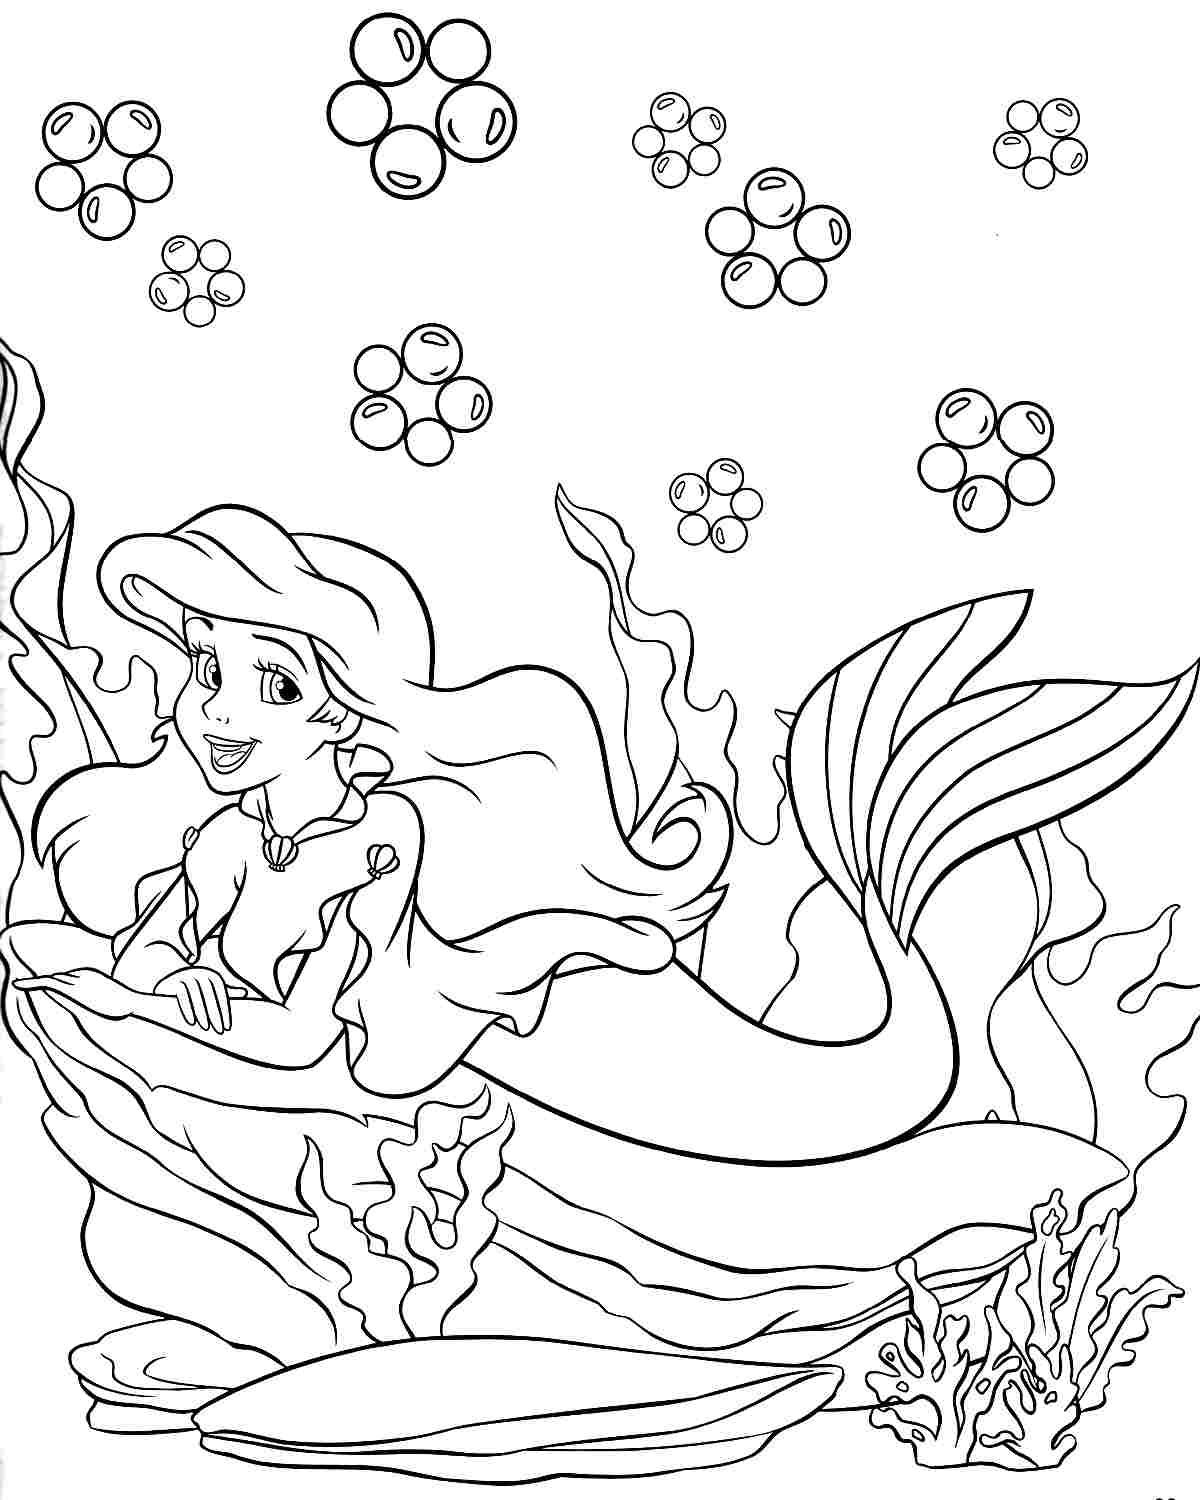 Disney Princess Winter Coloring Pages - Coloring Home